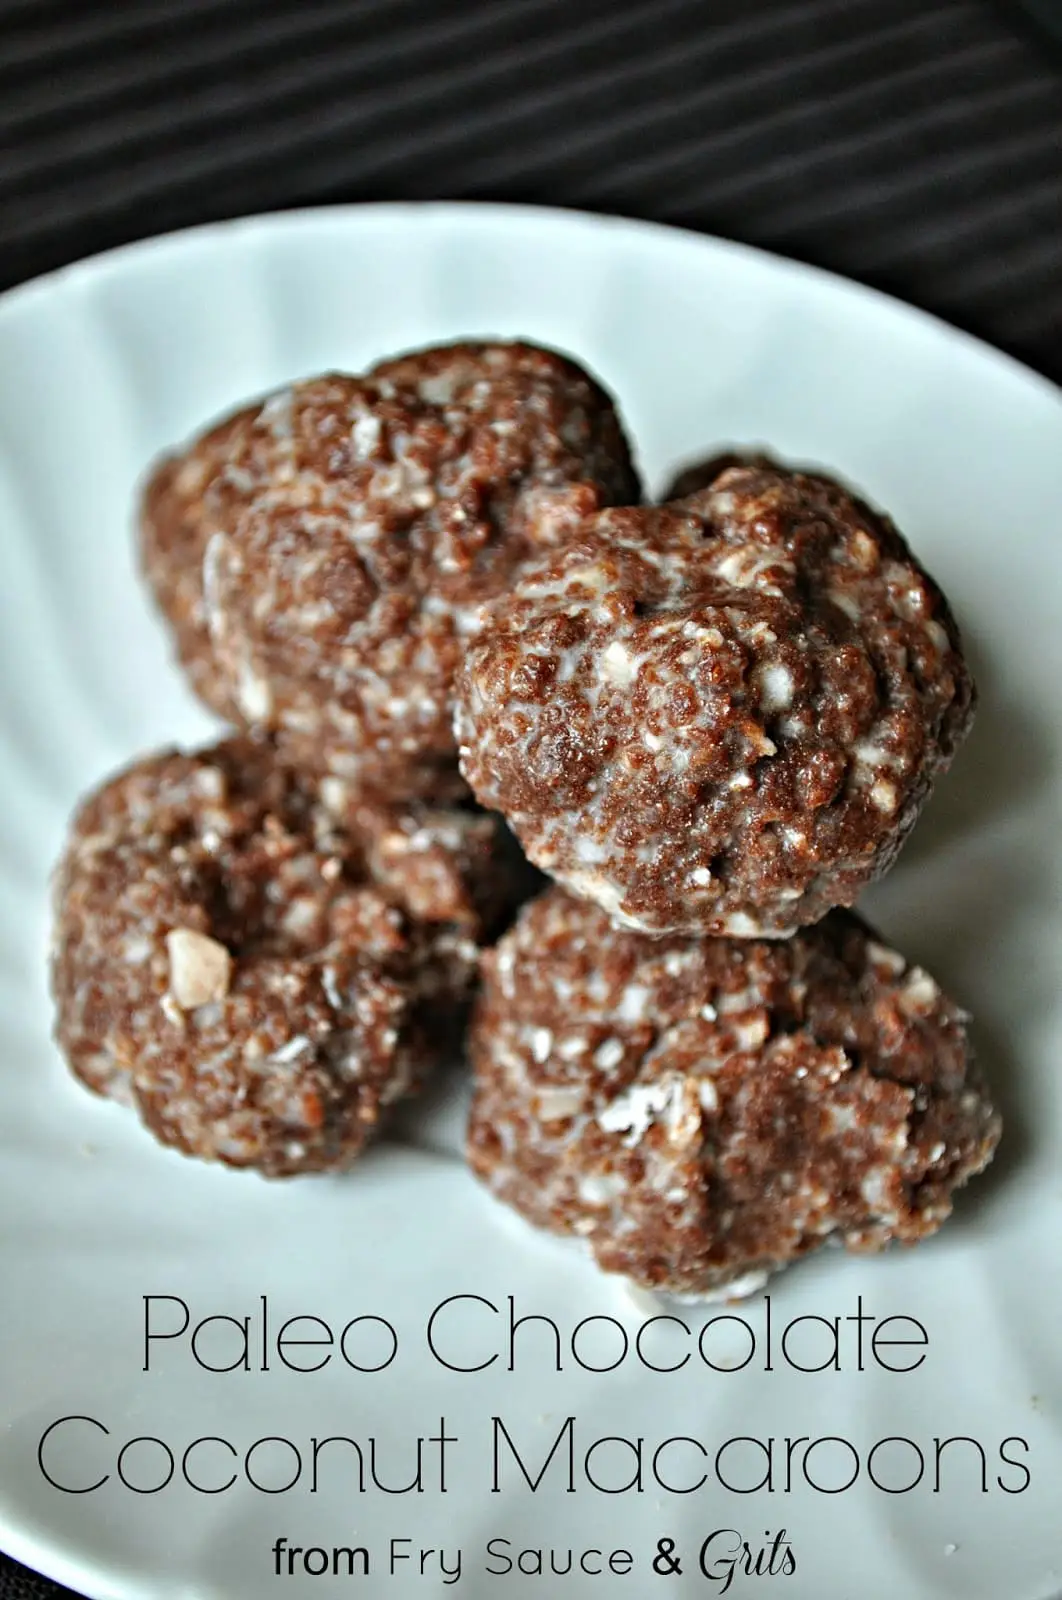 Paleo Chocolate Coconut Macaroons from Fry Sauce and Grits